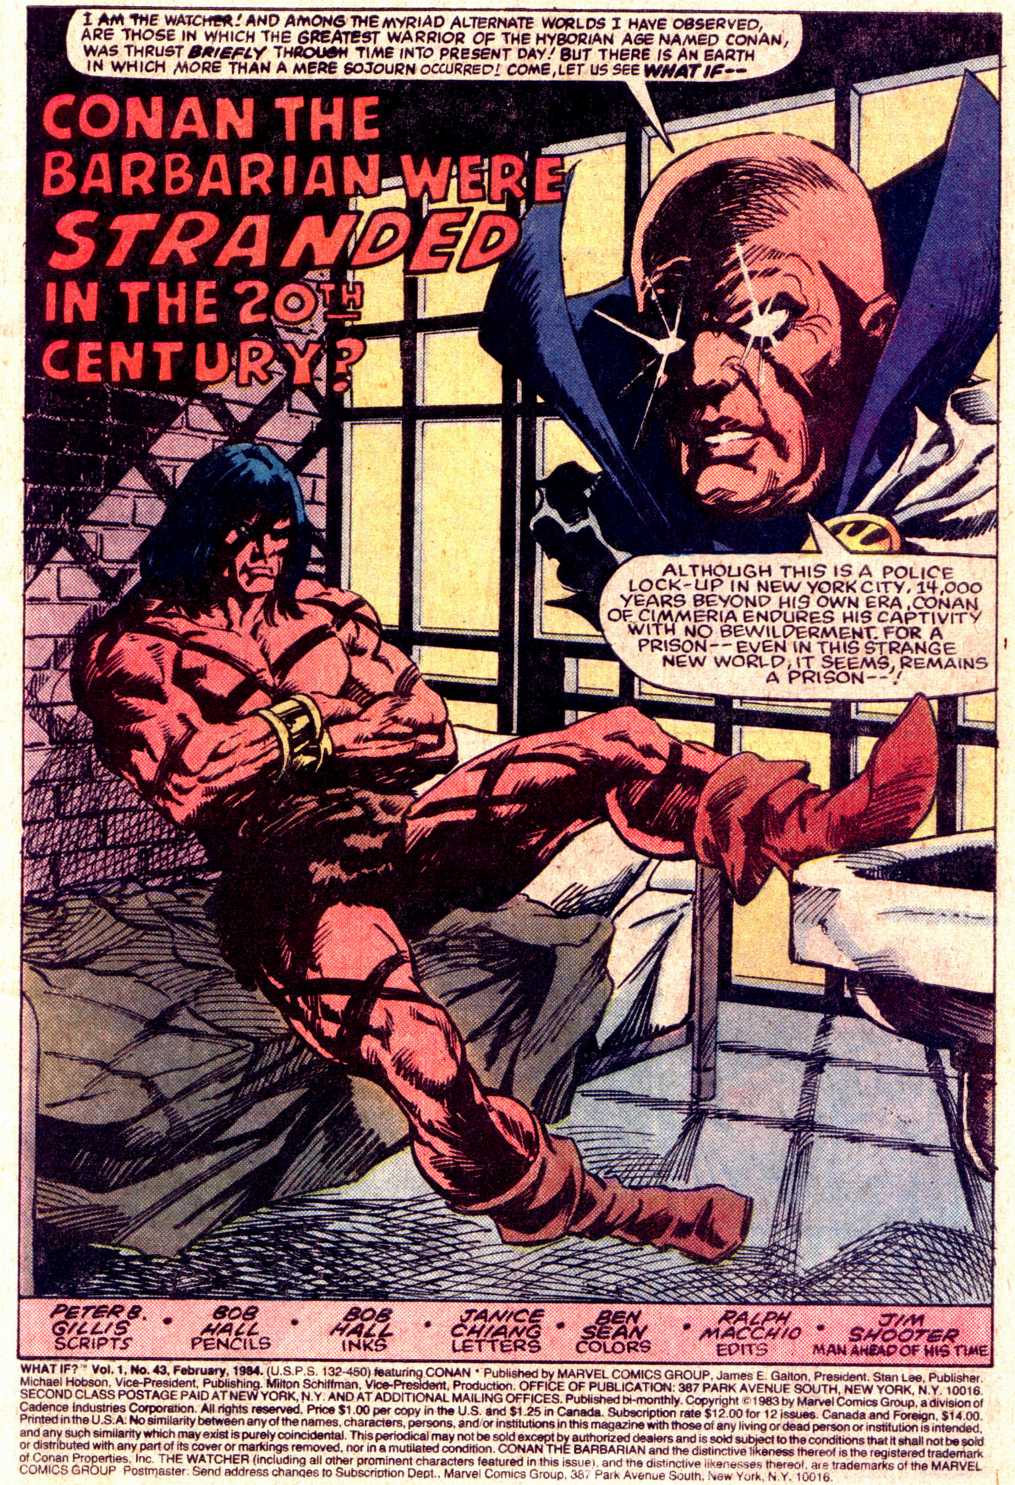 What If? (1977) #43_-_Conan_the_Barbarian_were_stranded_in_the_20th_century #43 - English 2